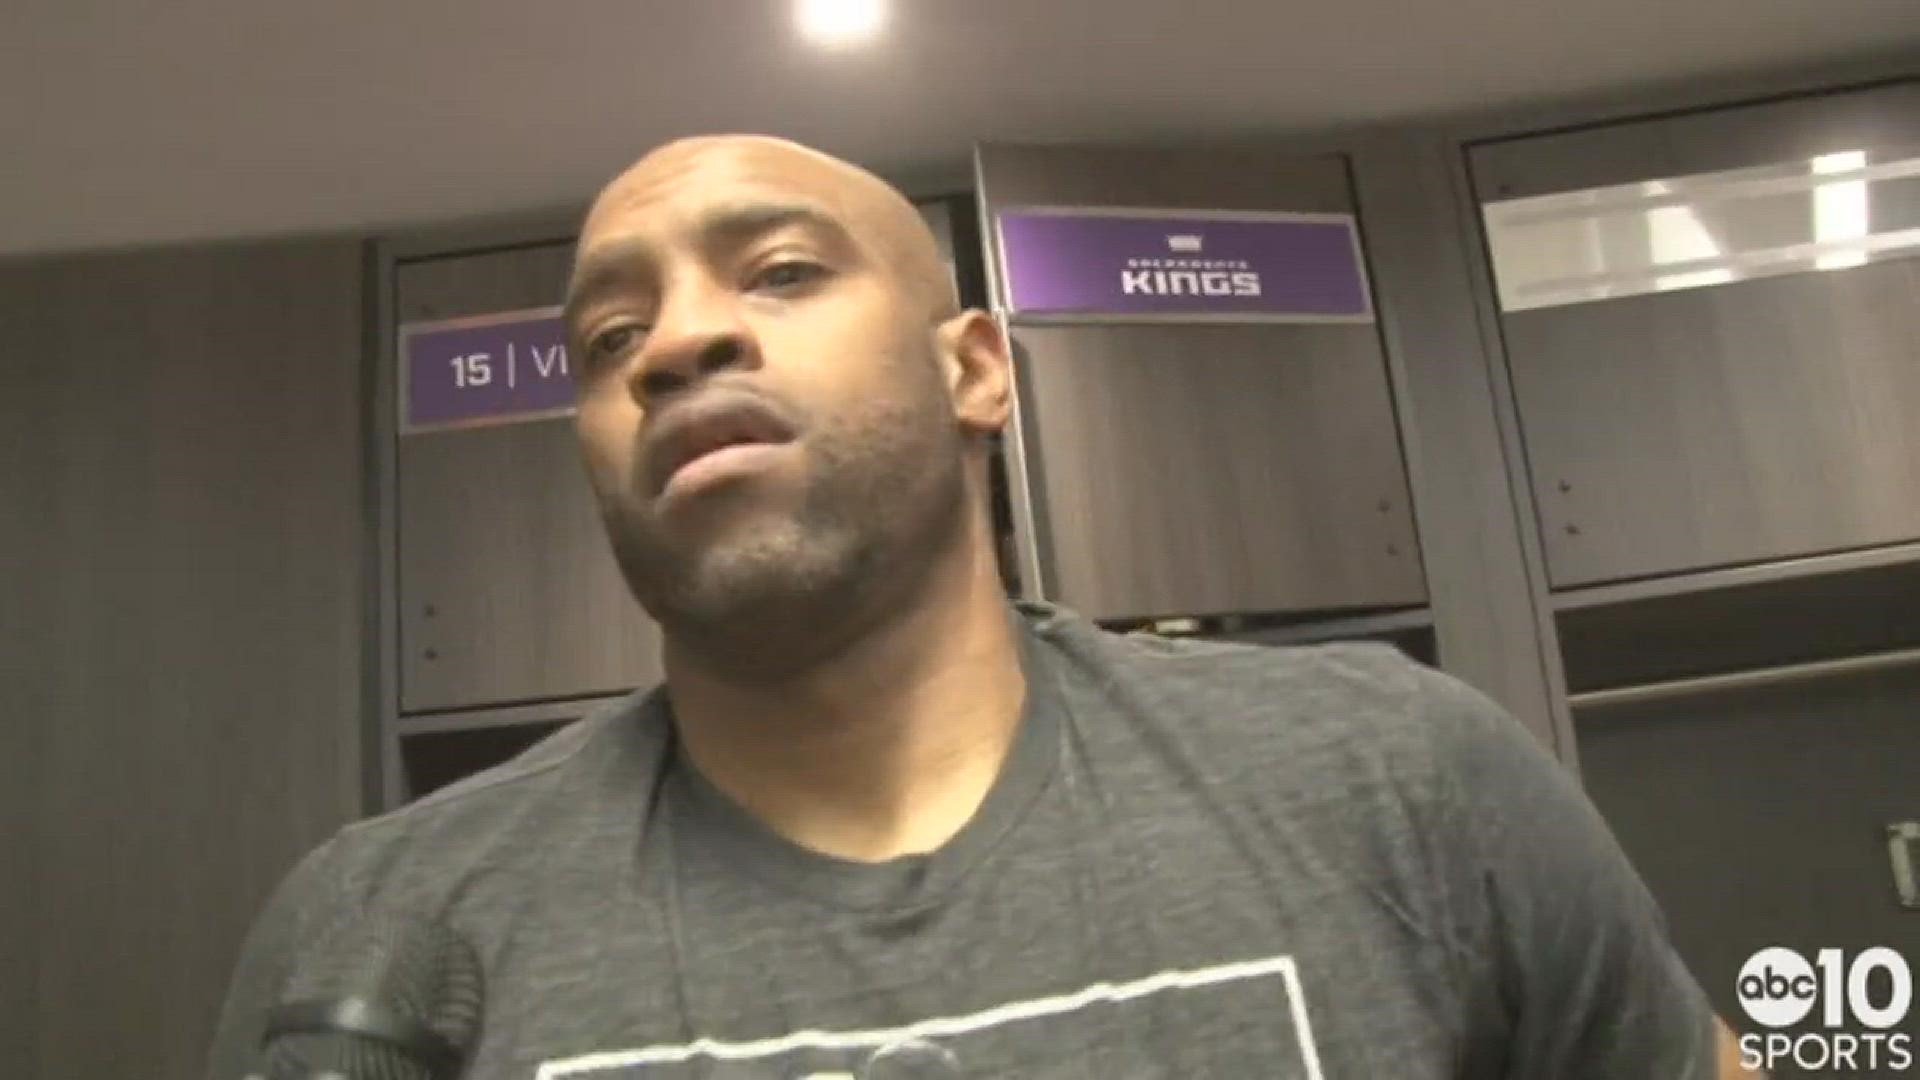 Kings forward Vince Carter discusses Thursday's heart-breaking loss to the Oklahoma City Thunder, the buzzer-beater from Russell Westbrook and his deep three-point attempt in the team's final possession.